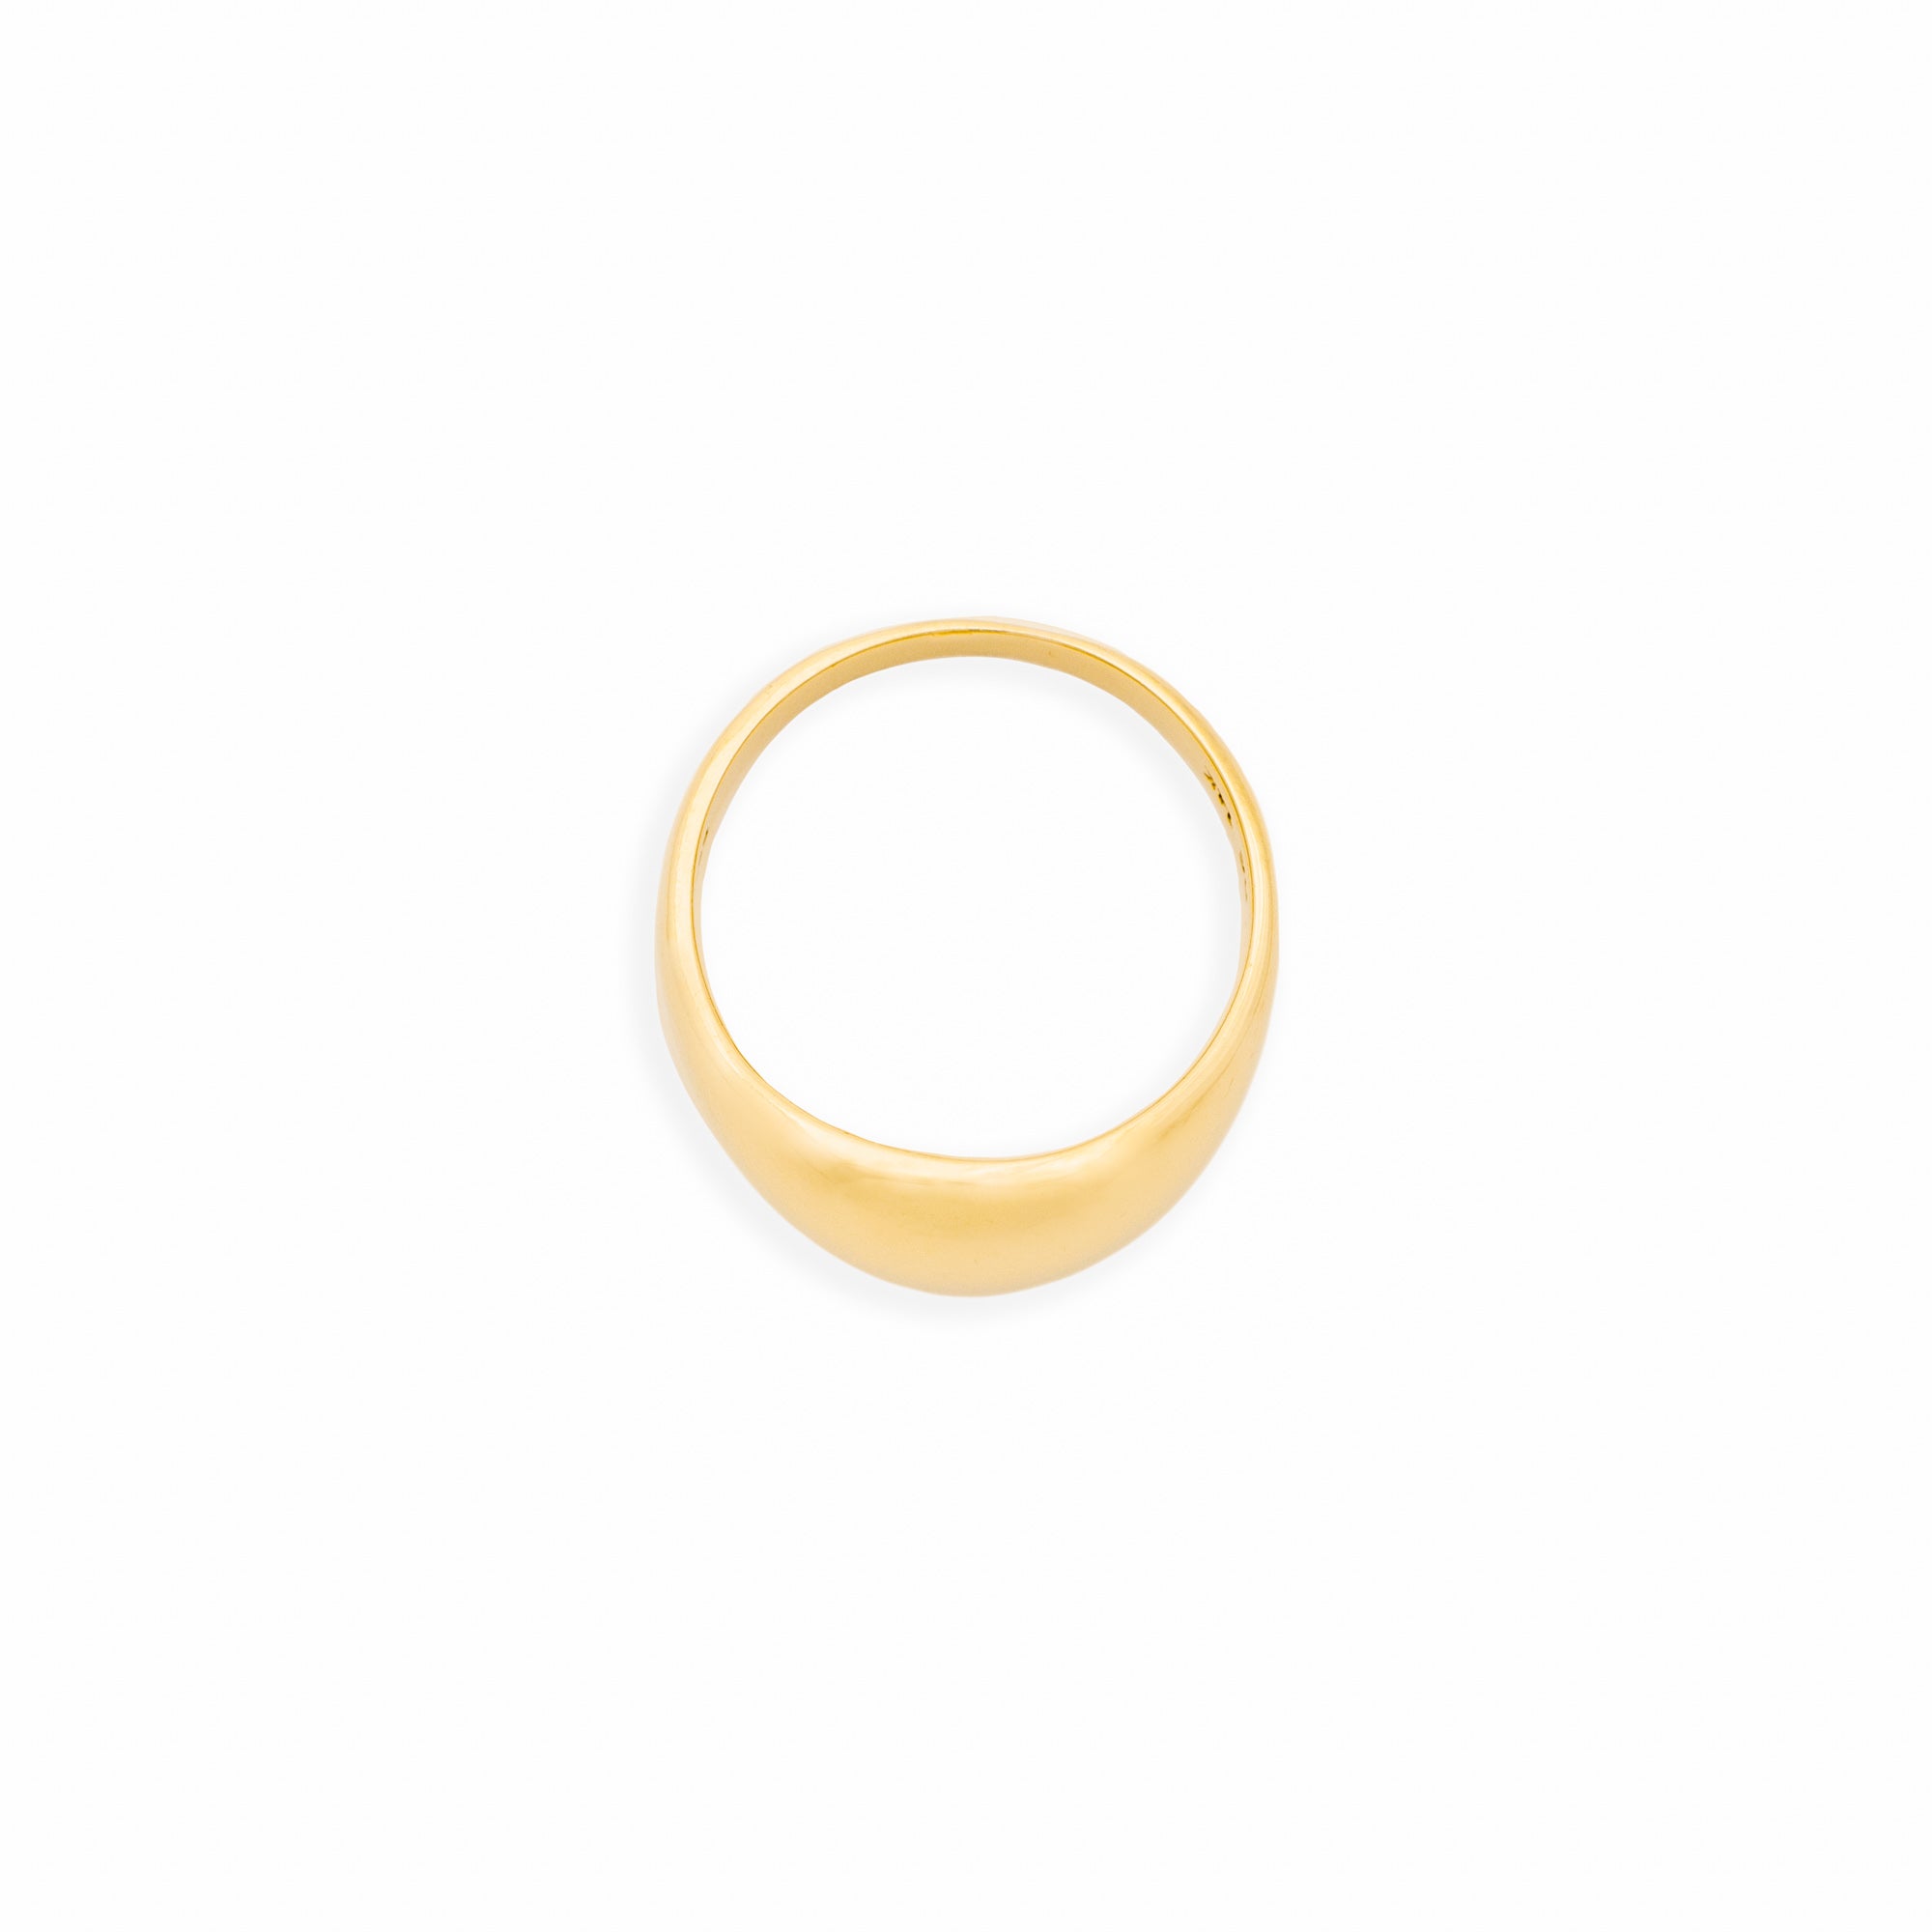 14k Yellow Gold Dome Ring from Erin Fader Jewelry